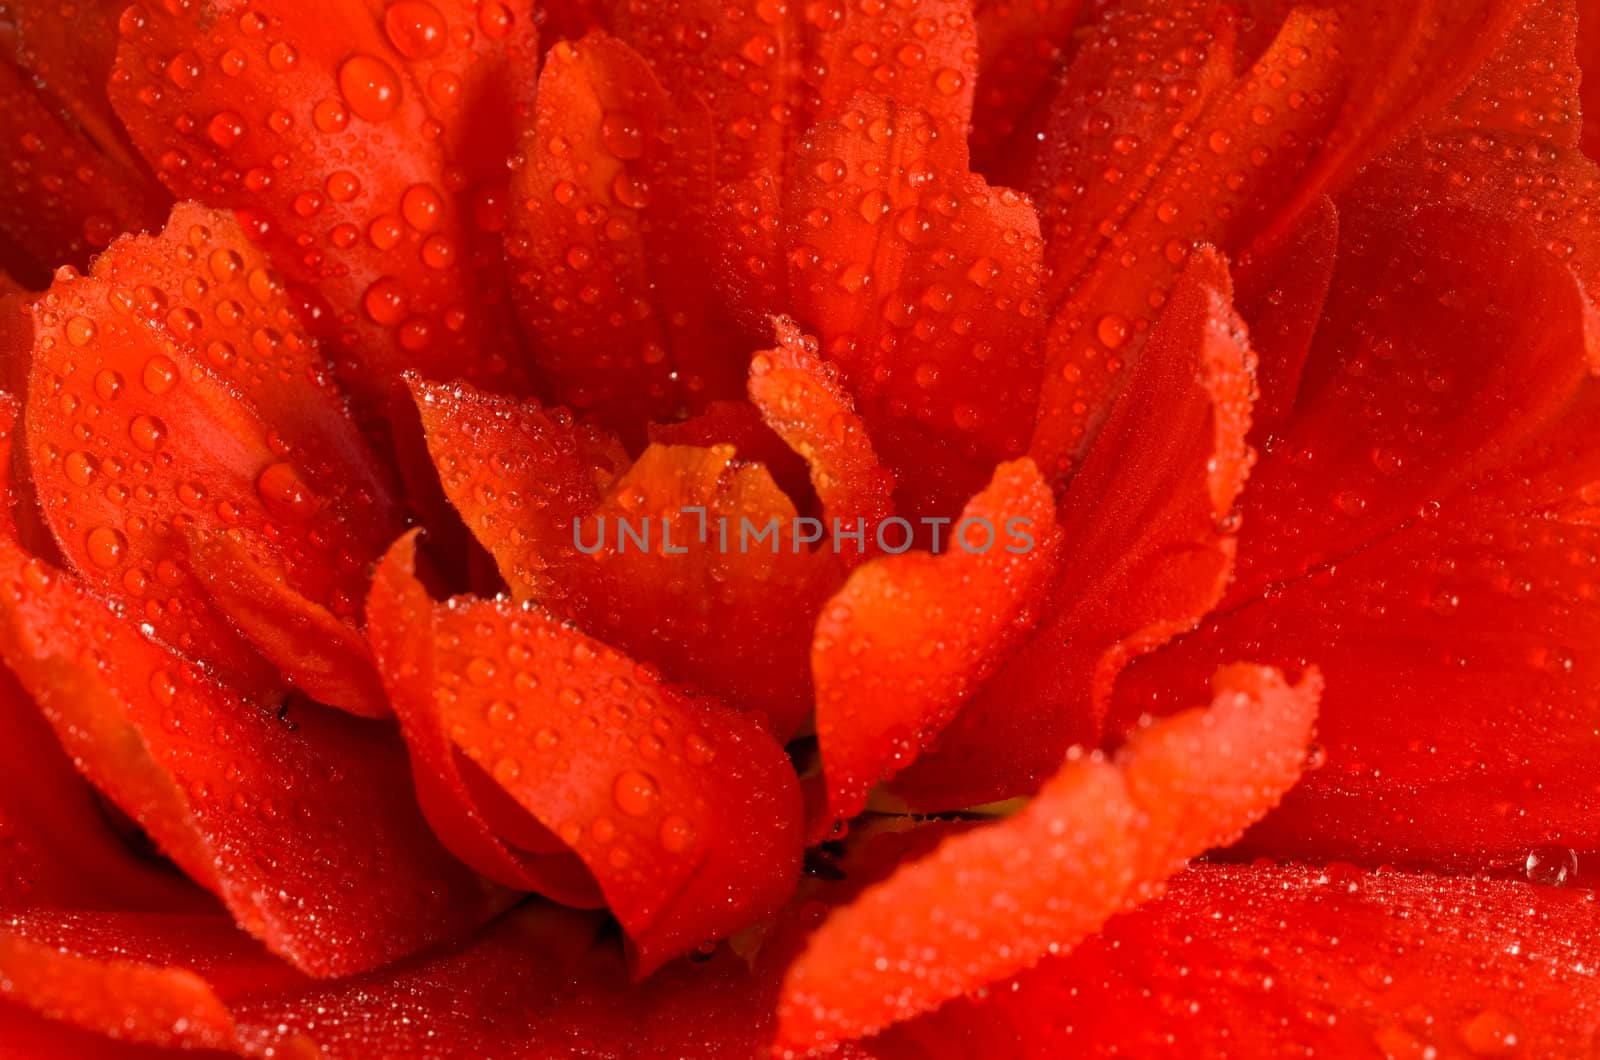 Extreme close-up of Red tulip bud with water droplets over white